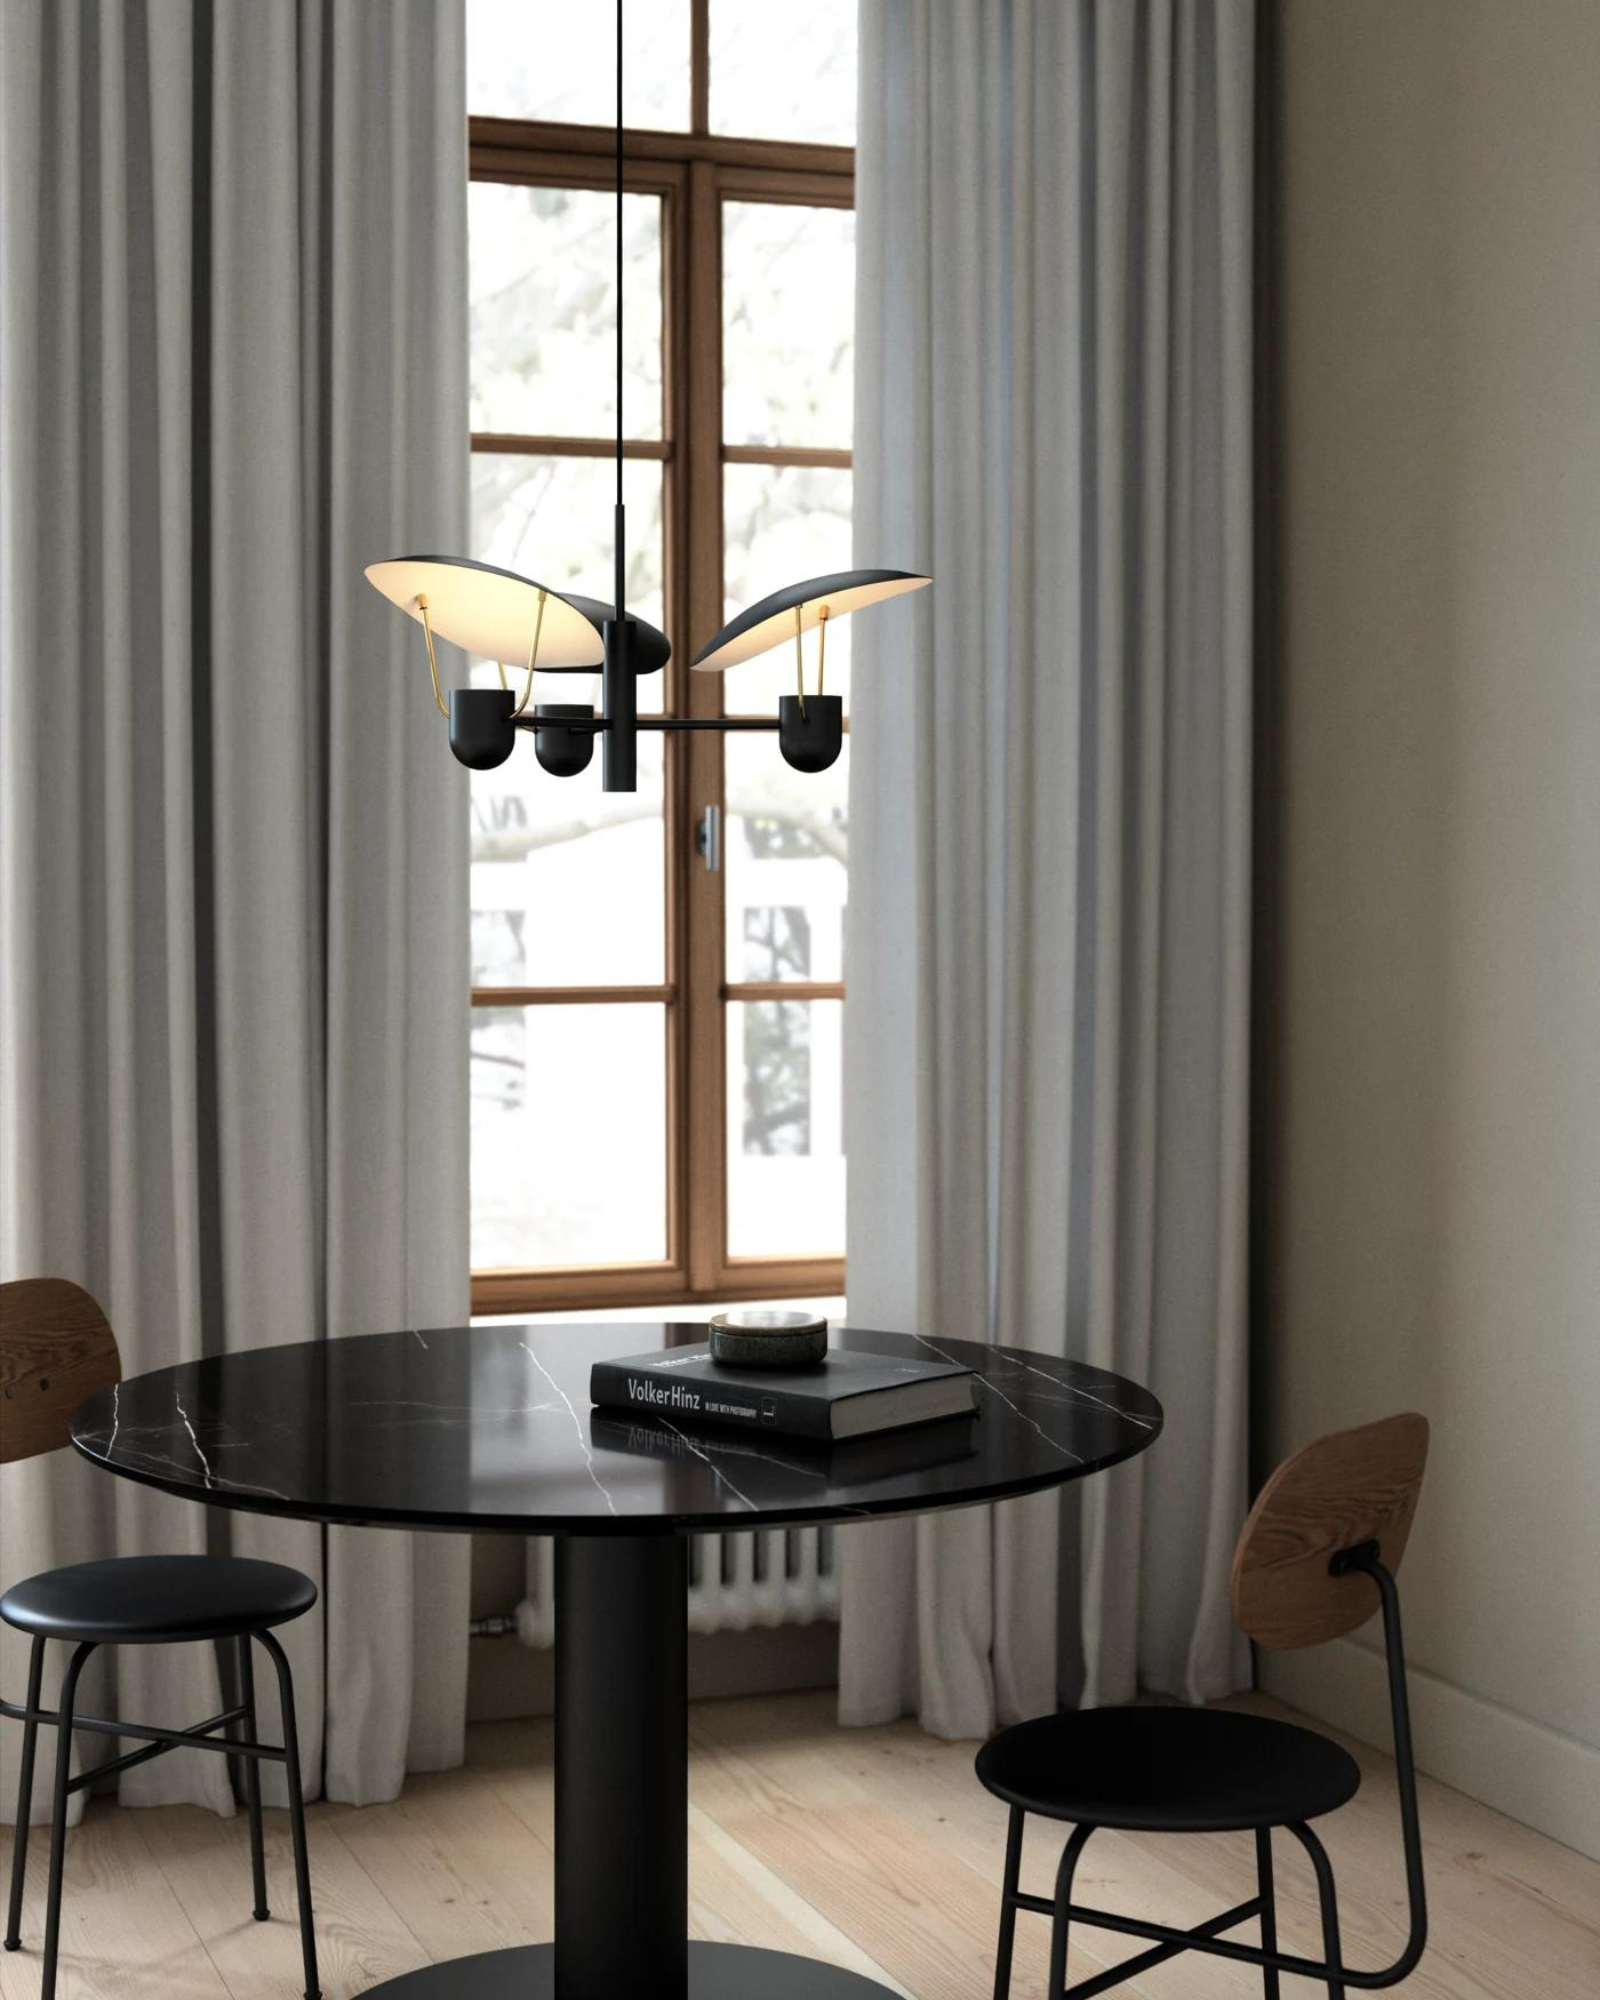 Fabiola Pendant Light in black featured above a dining table